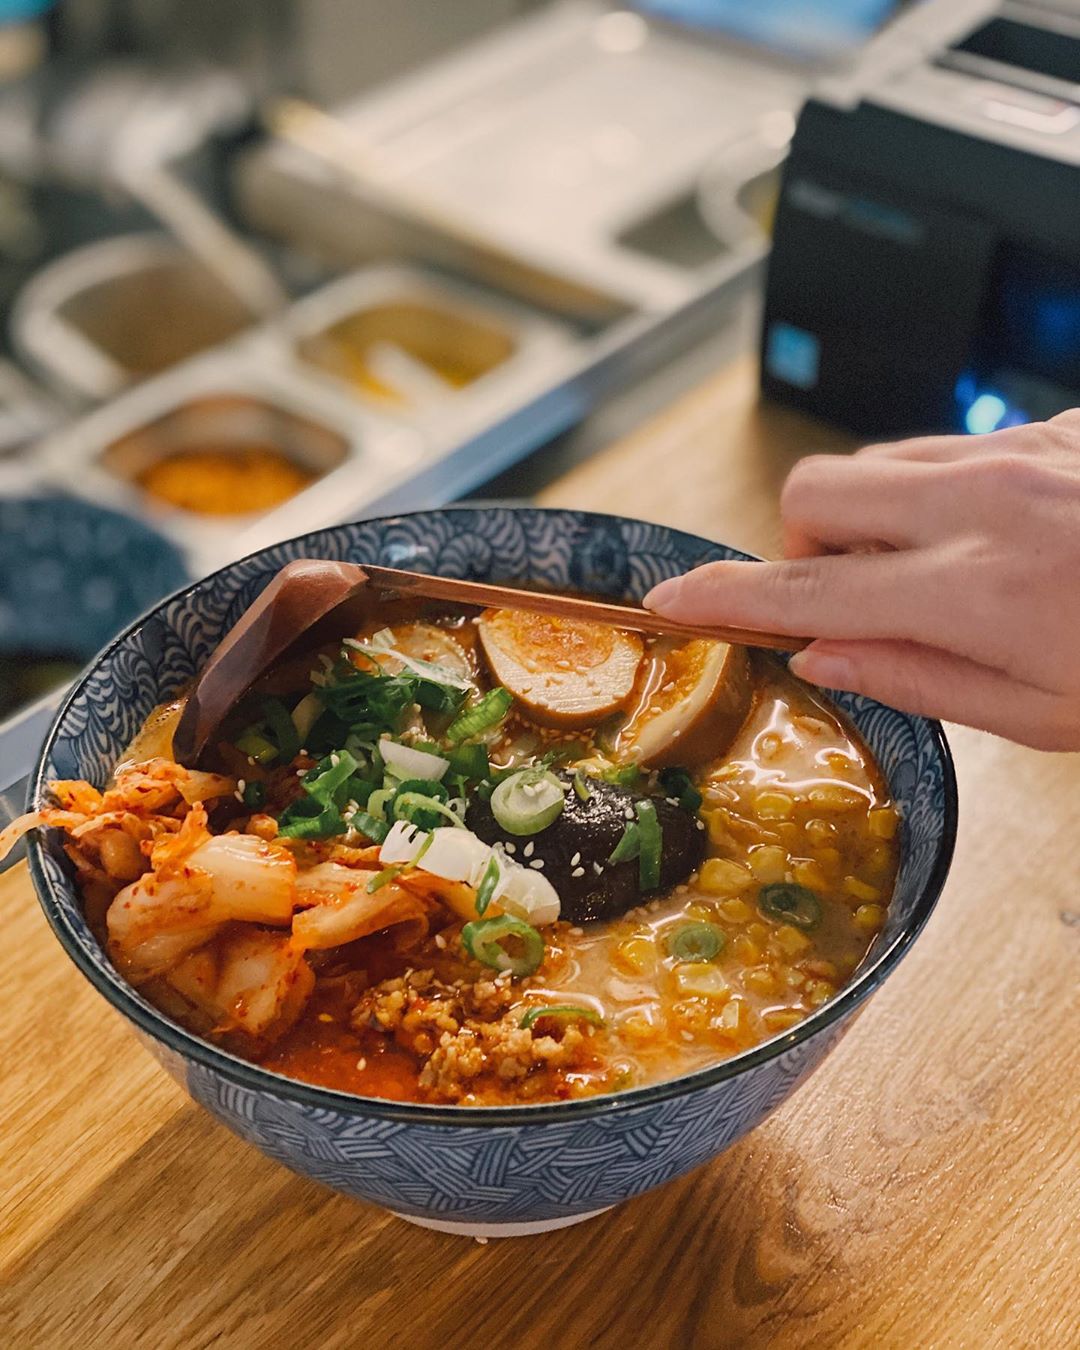 Our kimchi soup? homemade daily fresh noodles, eggs, corn, bean sprouts, spring onion, sesame, spicy, shiitake, pork slices, ground pork, and ofcourse kimchi? .
.
.
Handmodel: @lottevwanrooij ?
.
#XuNoodleBar #Tilburg #Noodles #Asian #Chinese #Food #Hotspot #FollowUs #SendNoods #foodie #instafood #Kimchi